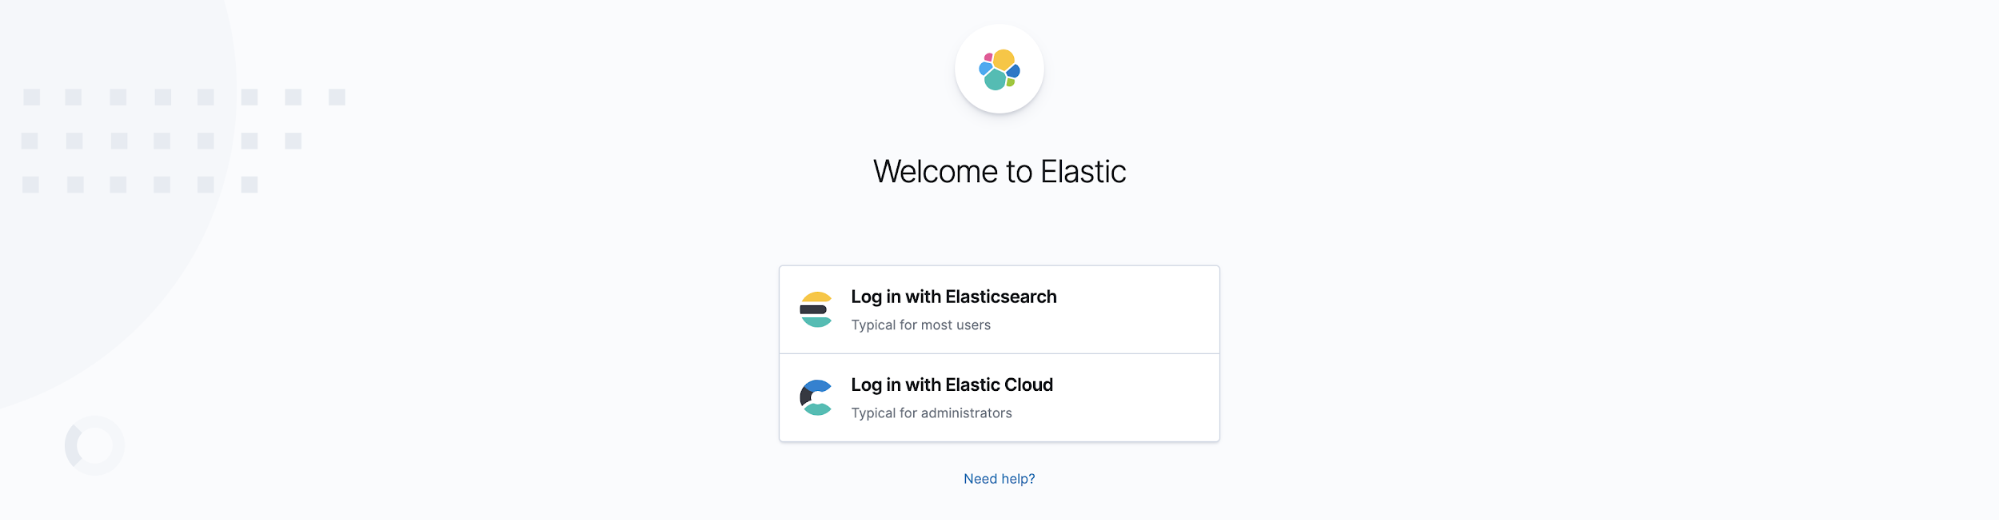 Log in as an administrator by selecting Log in with Elastic Cloud